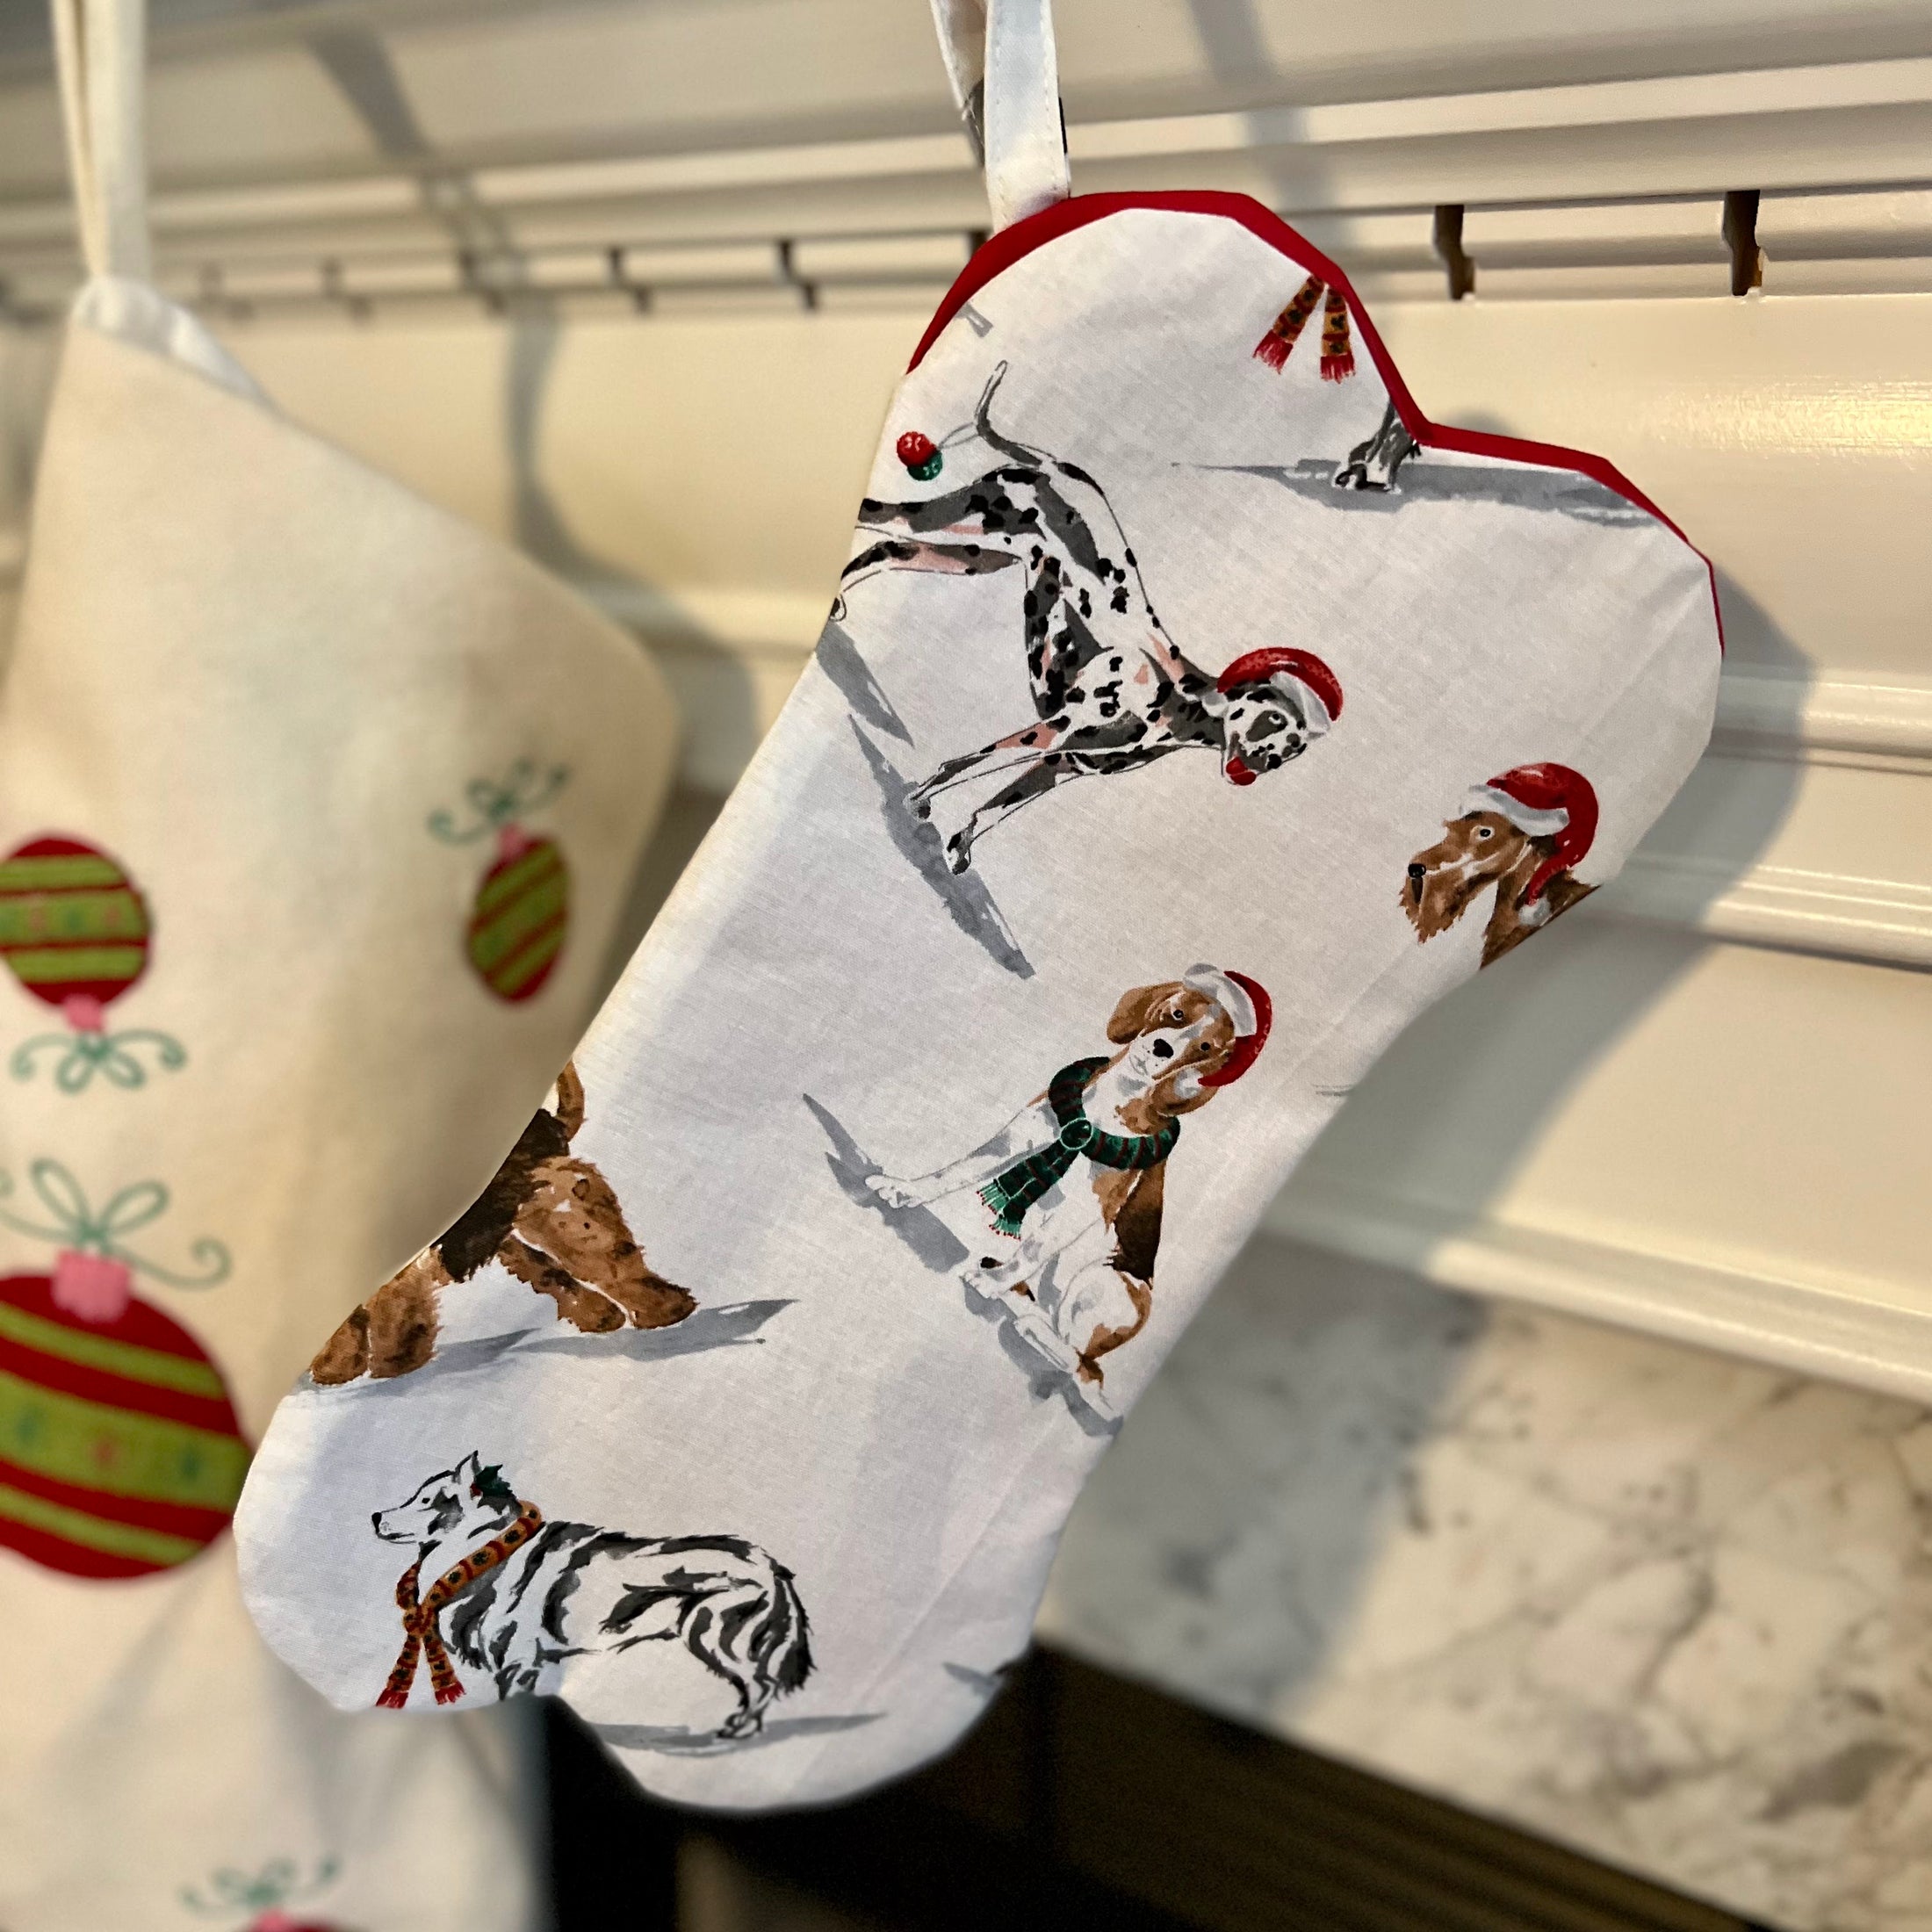 Bone shaped Christmas stocking for dogs hanging on a mantle with a red interior.